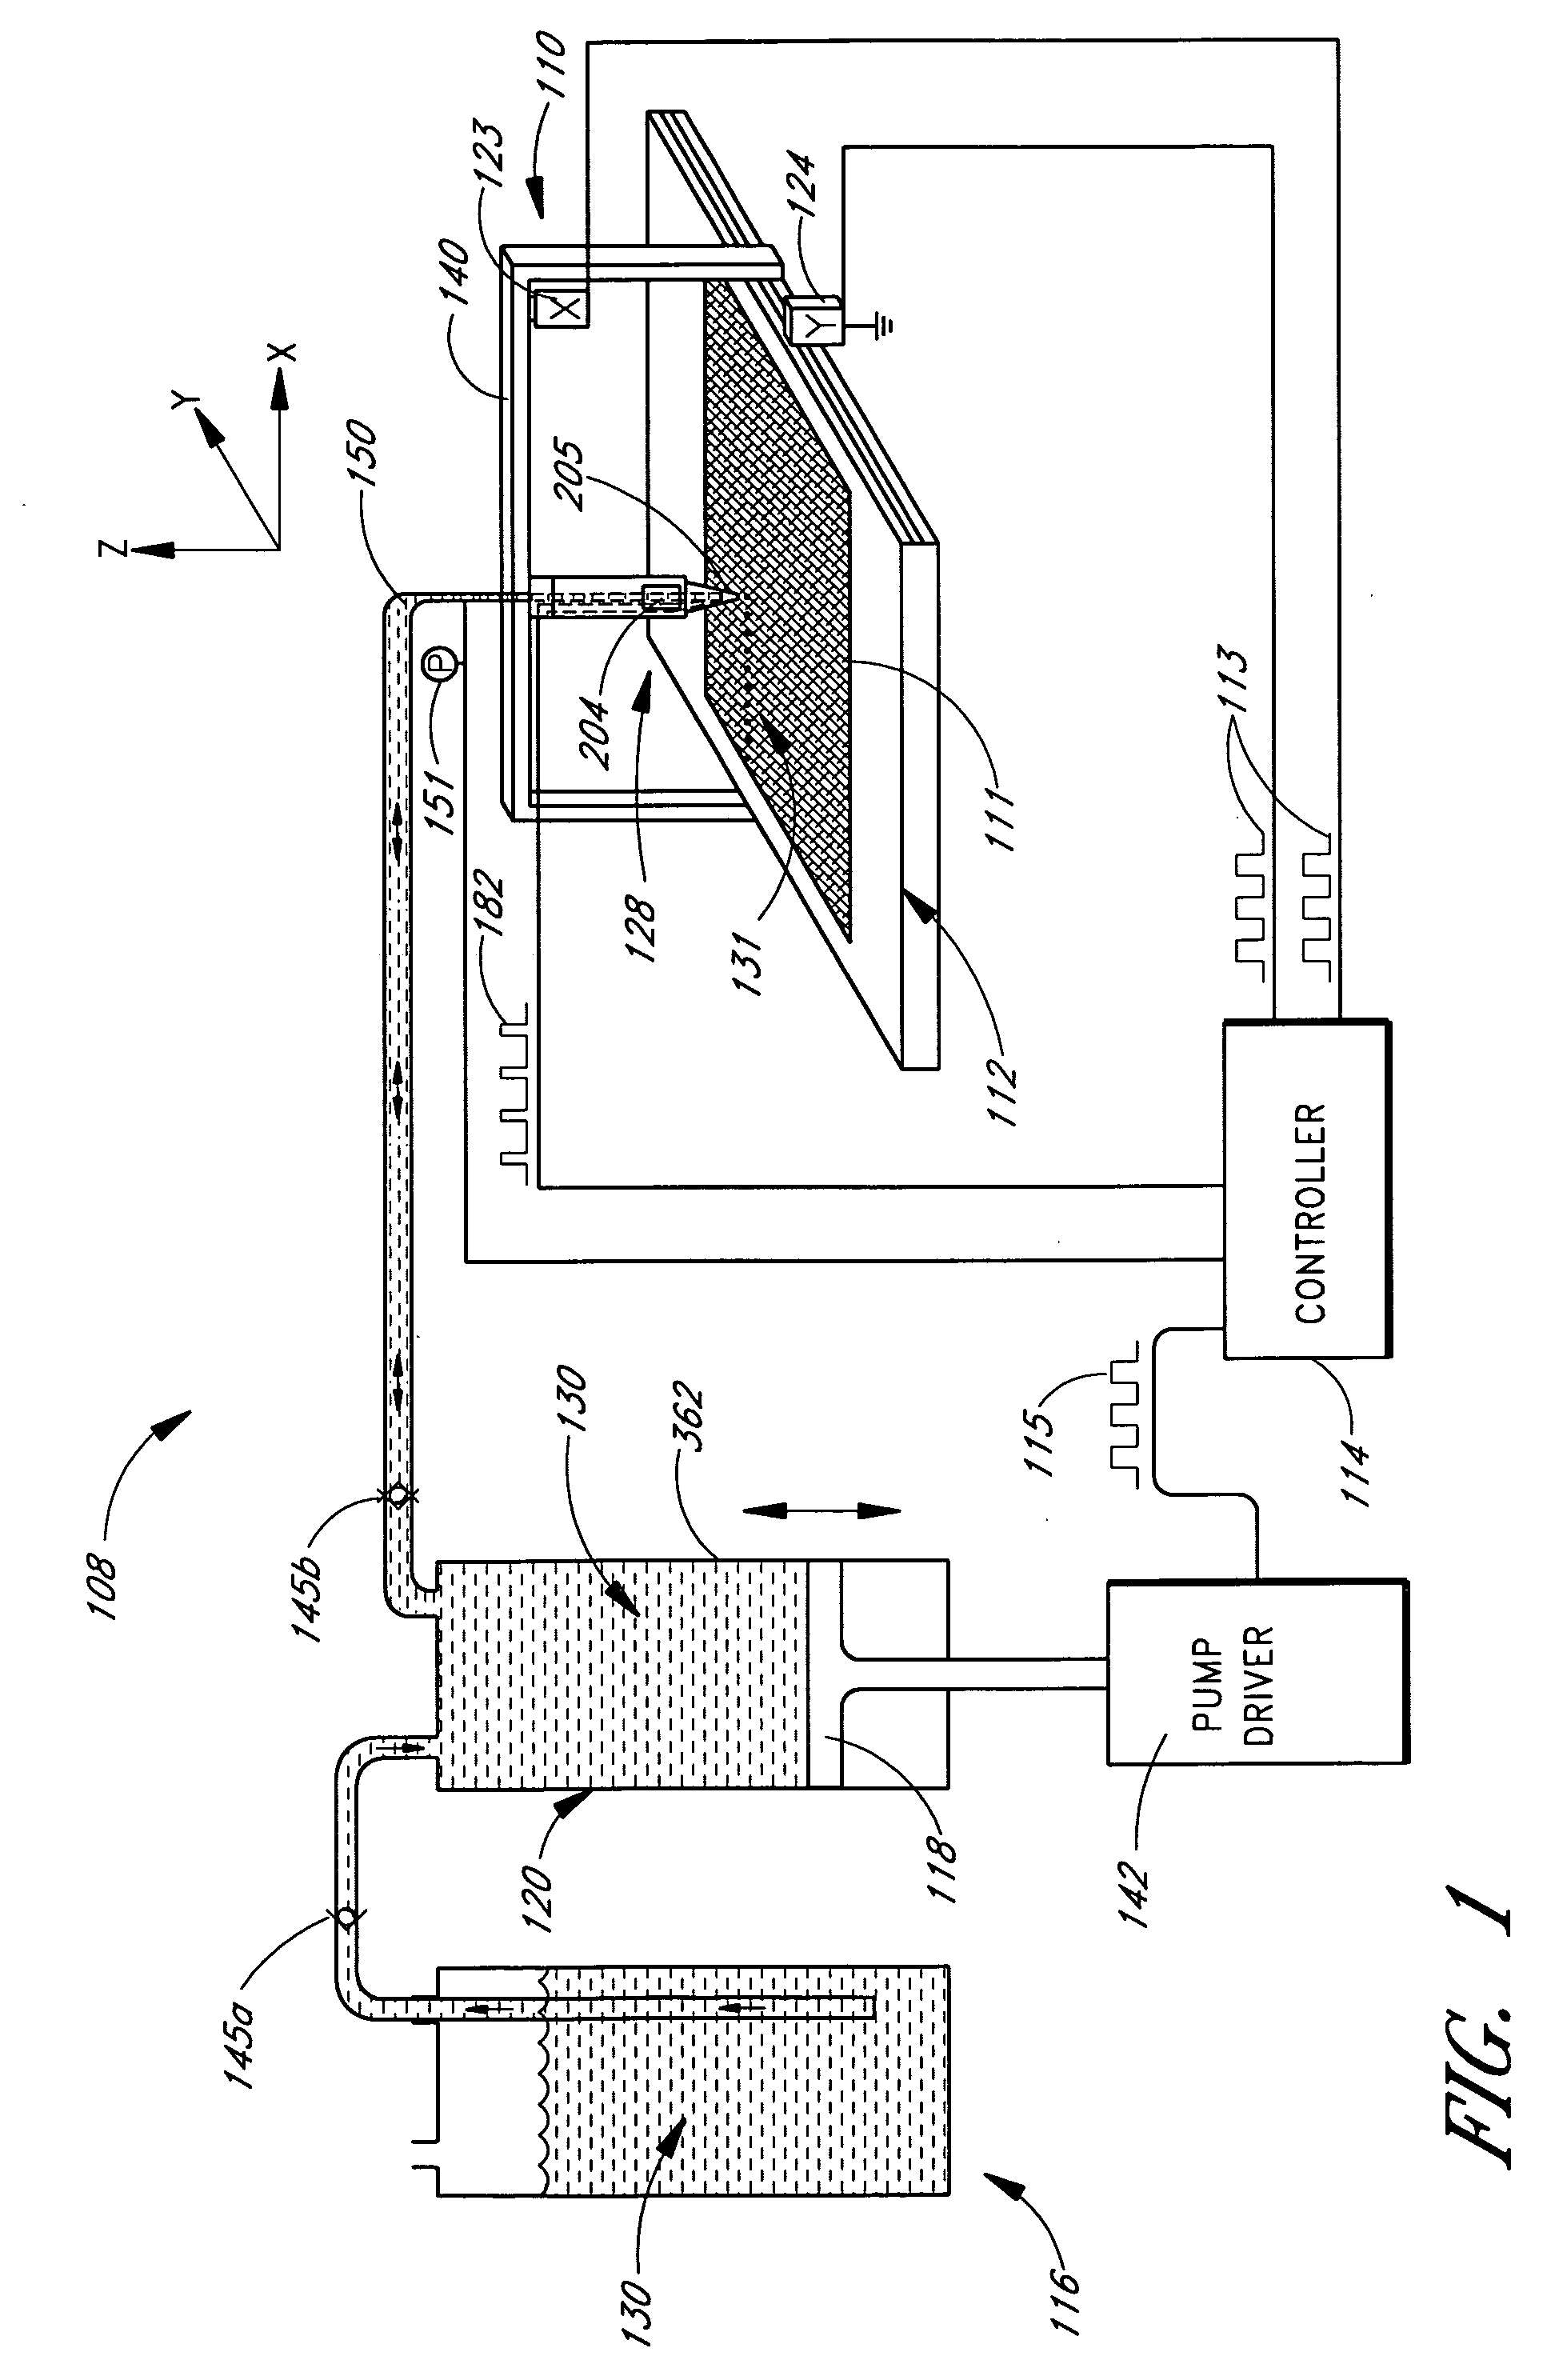 Method for high throughput drop dispensing of specific patterns